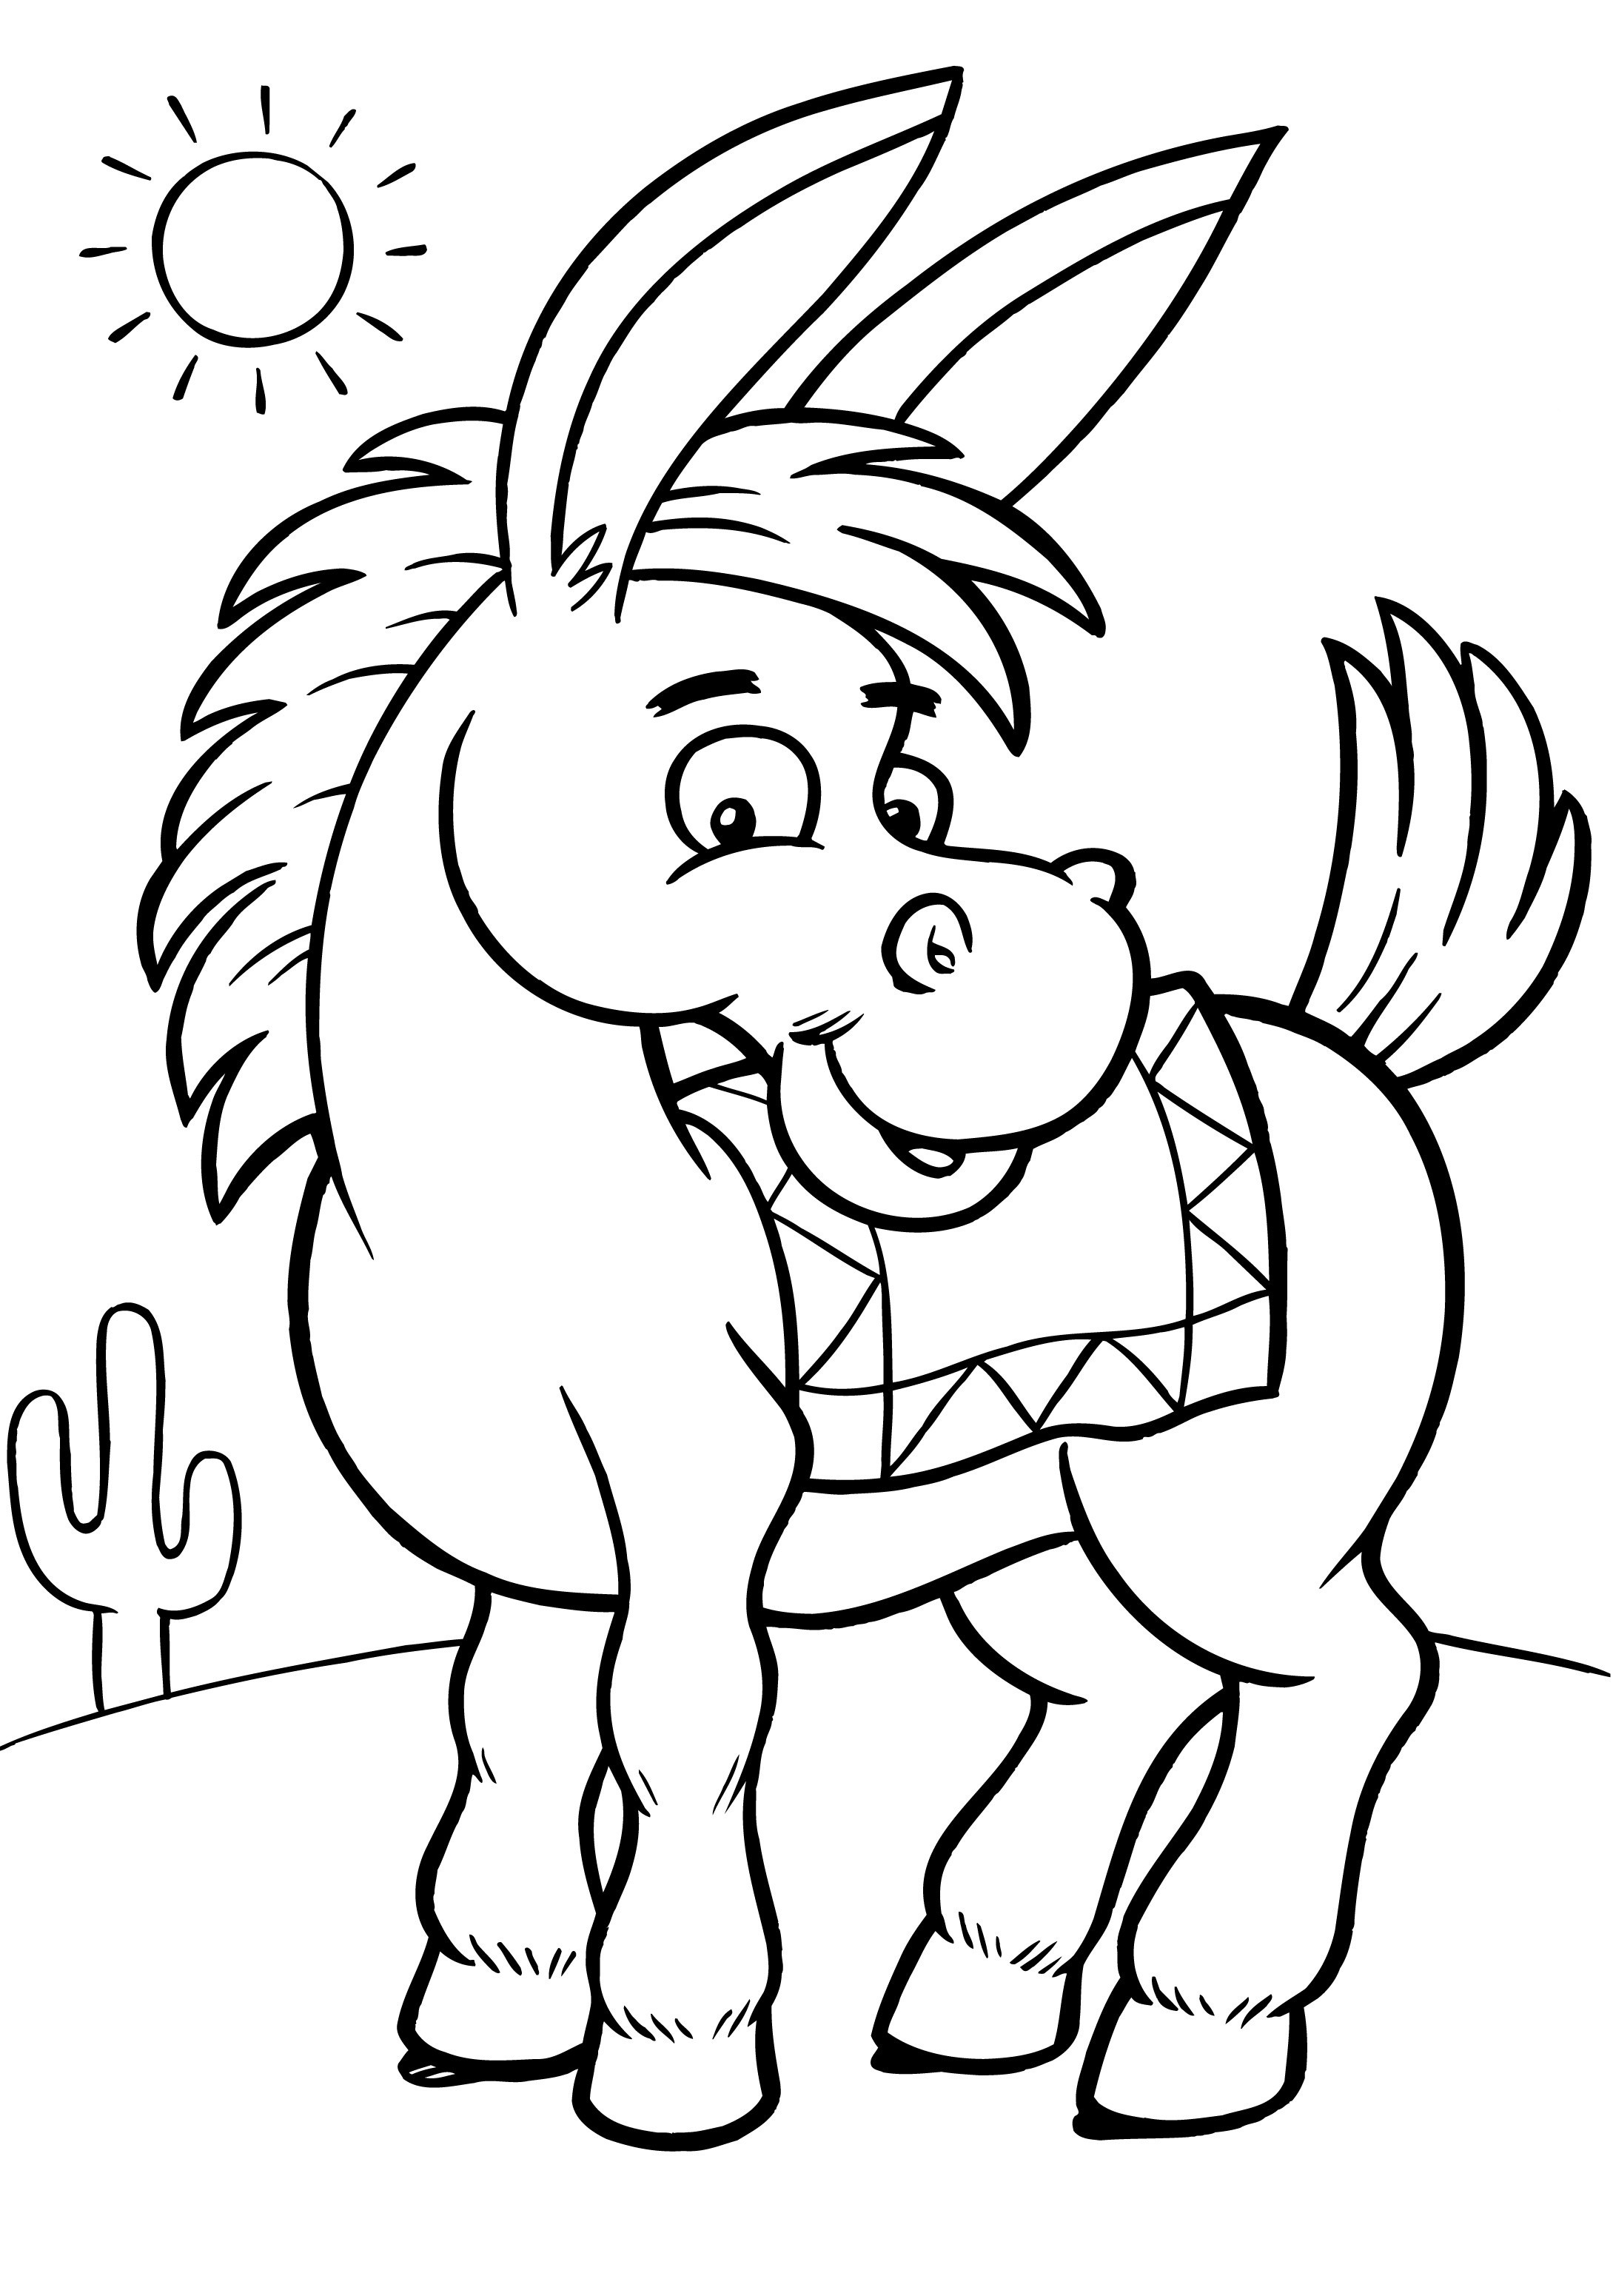 Coloring Pages To Print
 Free Printable Donkey Coloring Pages For Kids